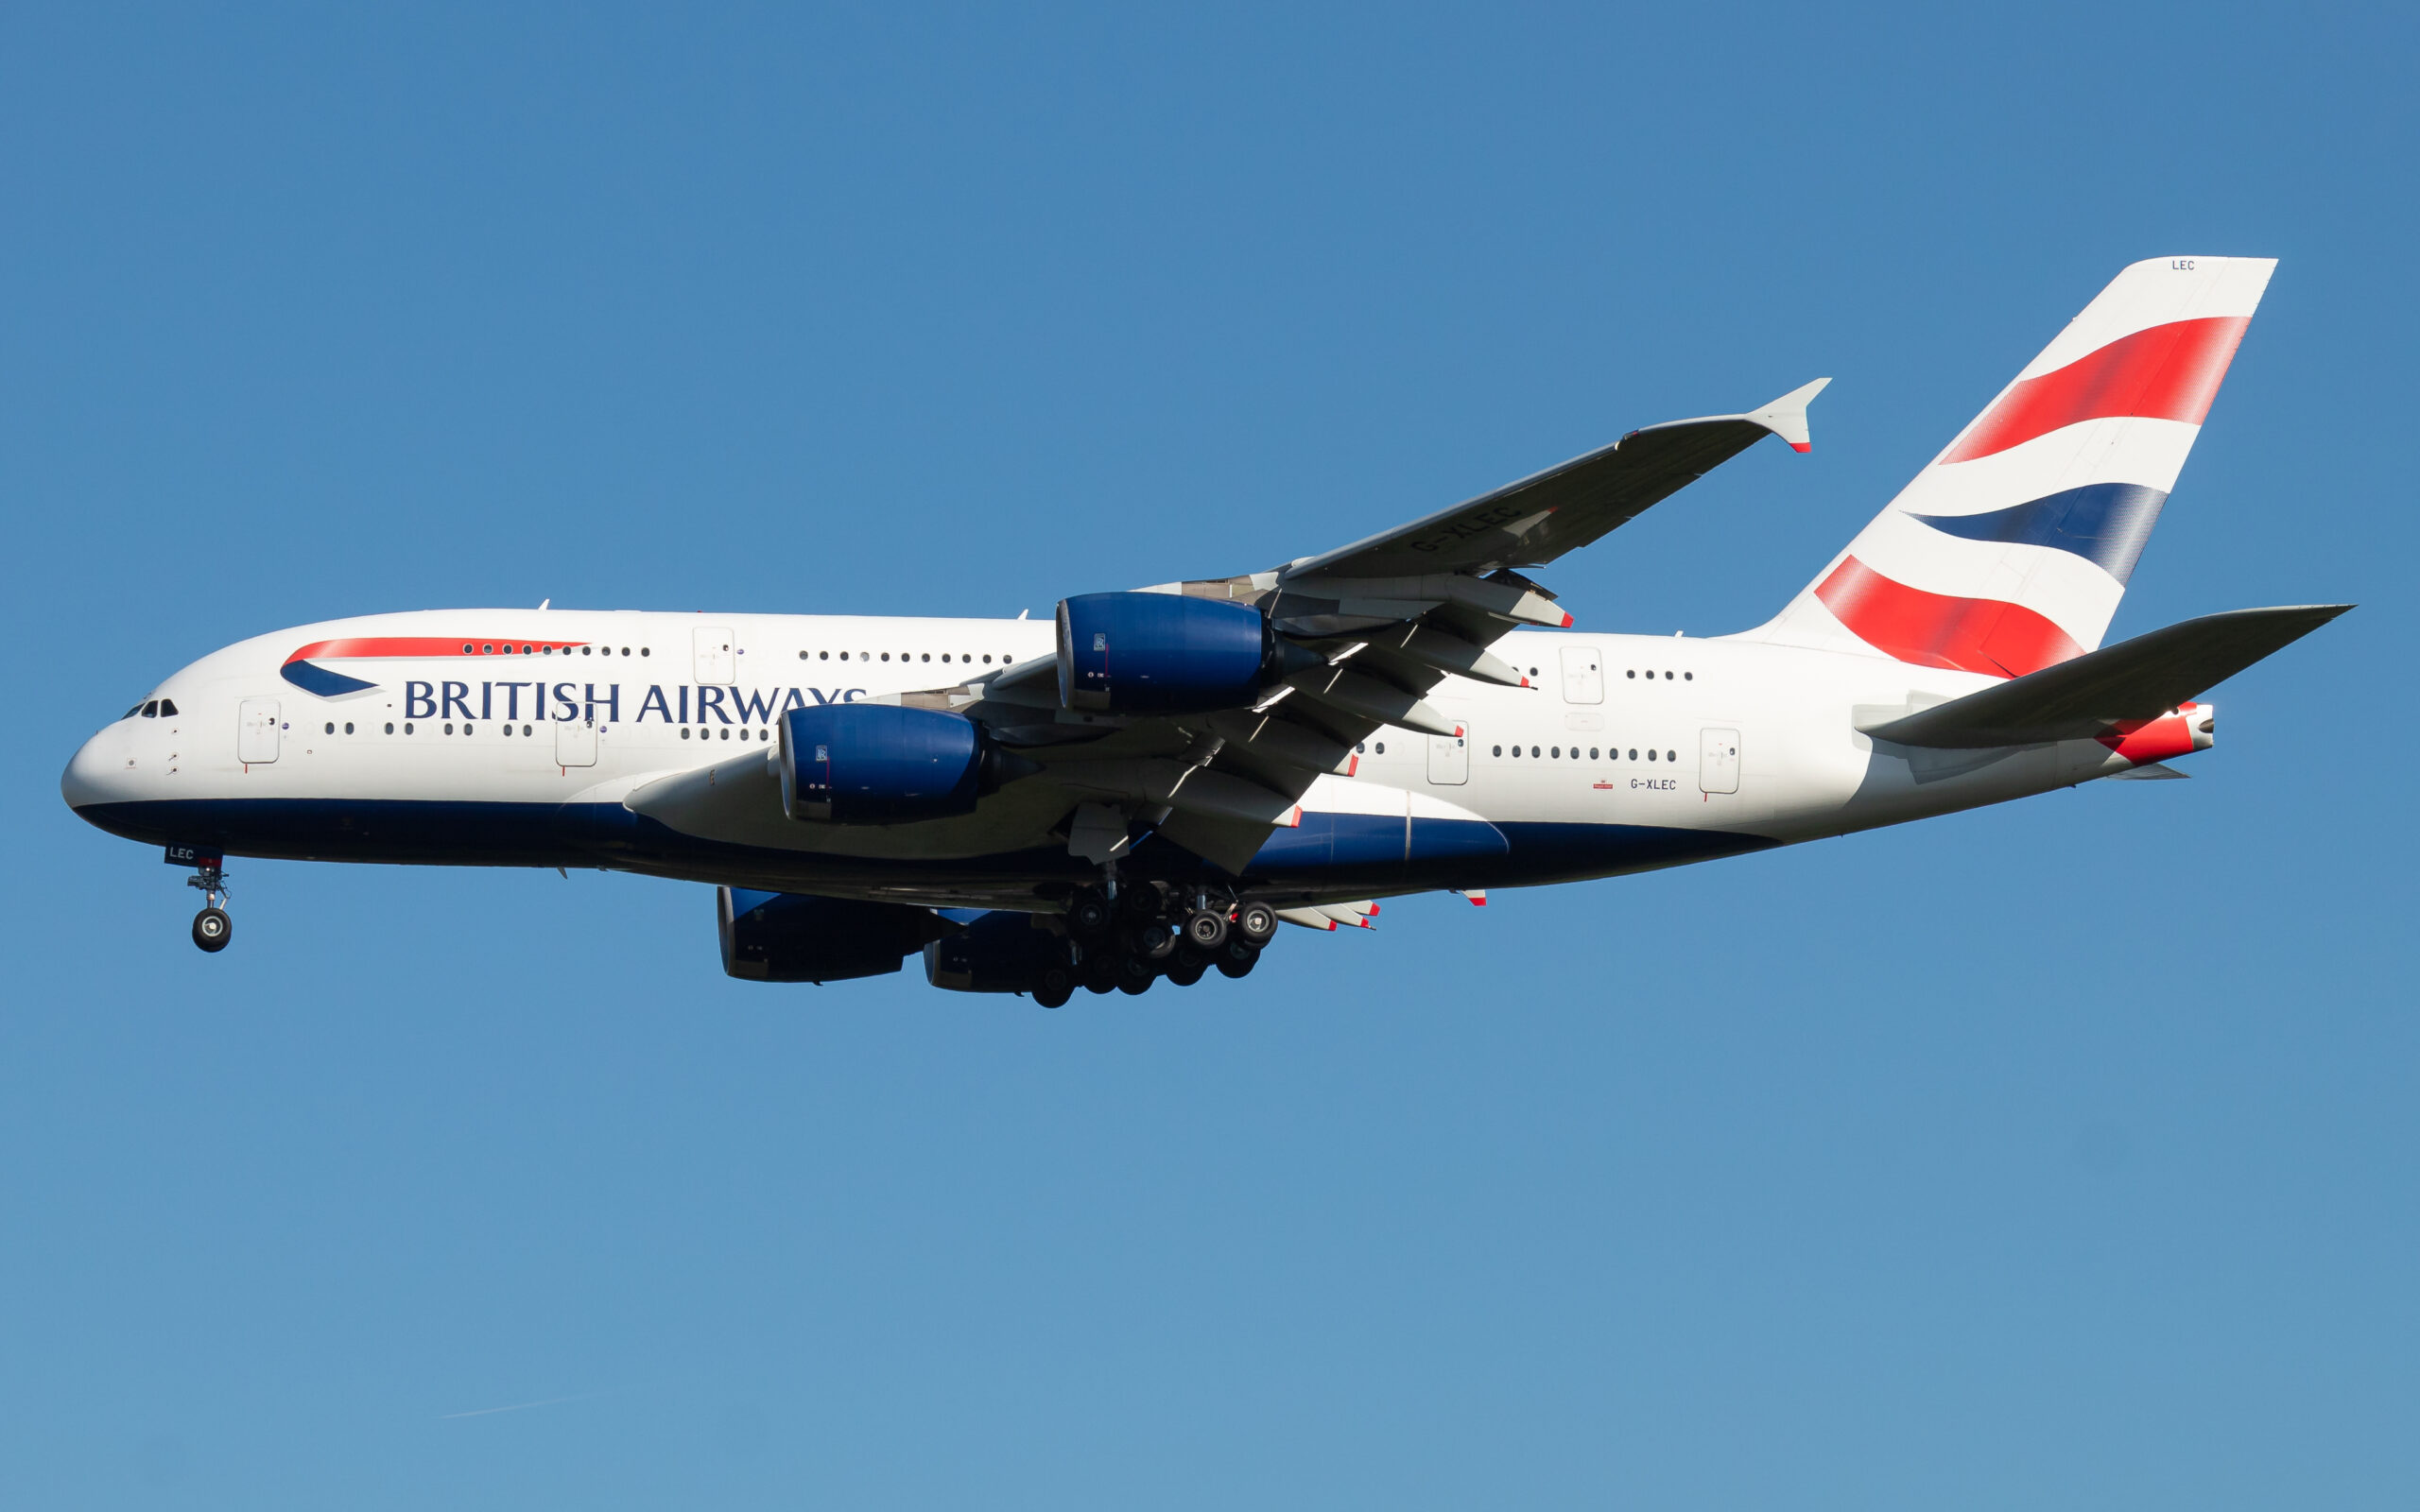 British Airways will hope that the expected demand from Summer 2023 will help recover from the affected troubles during COVID-19.